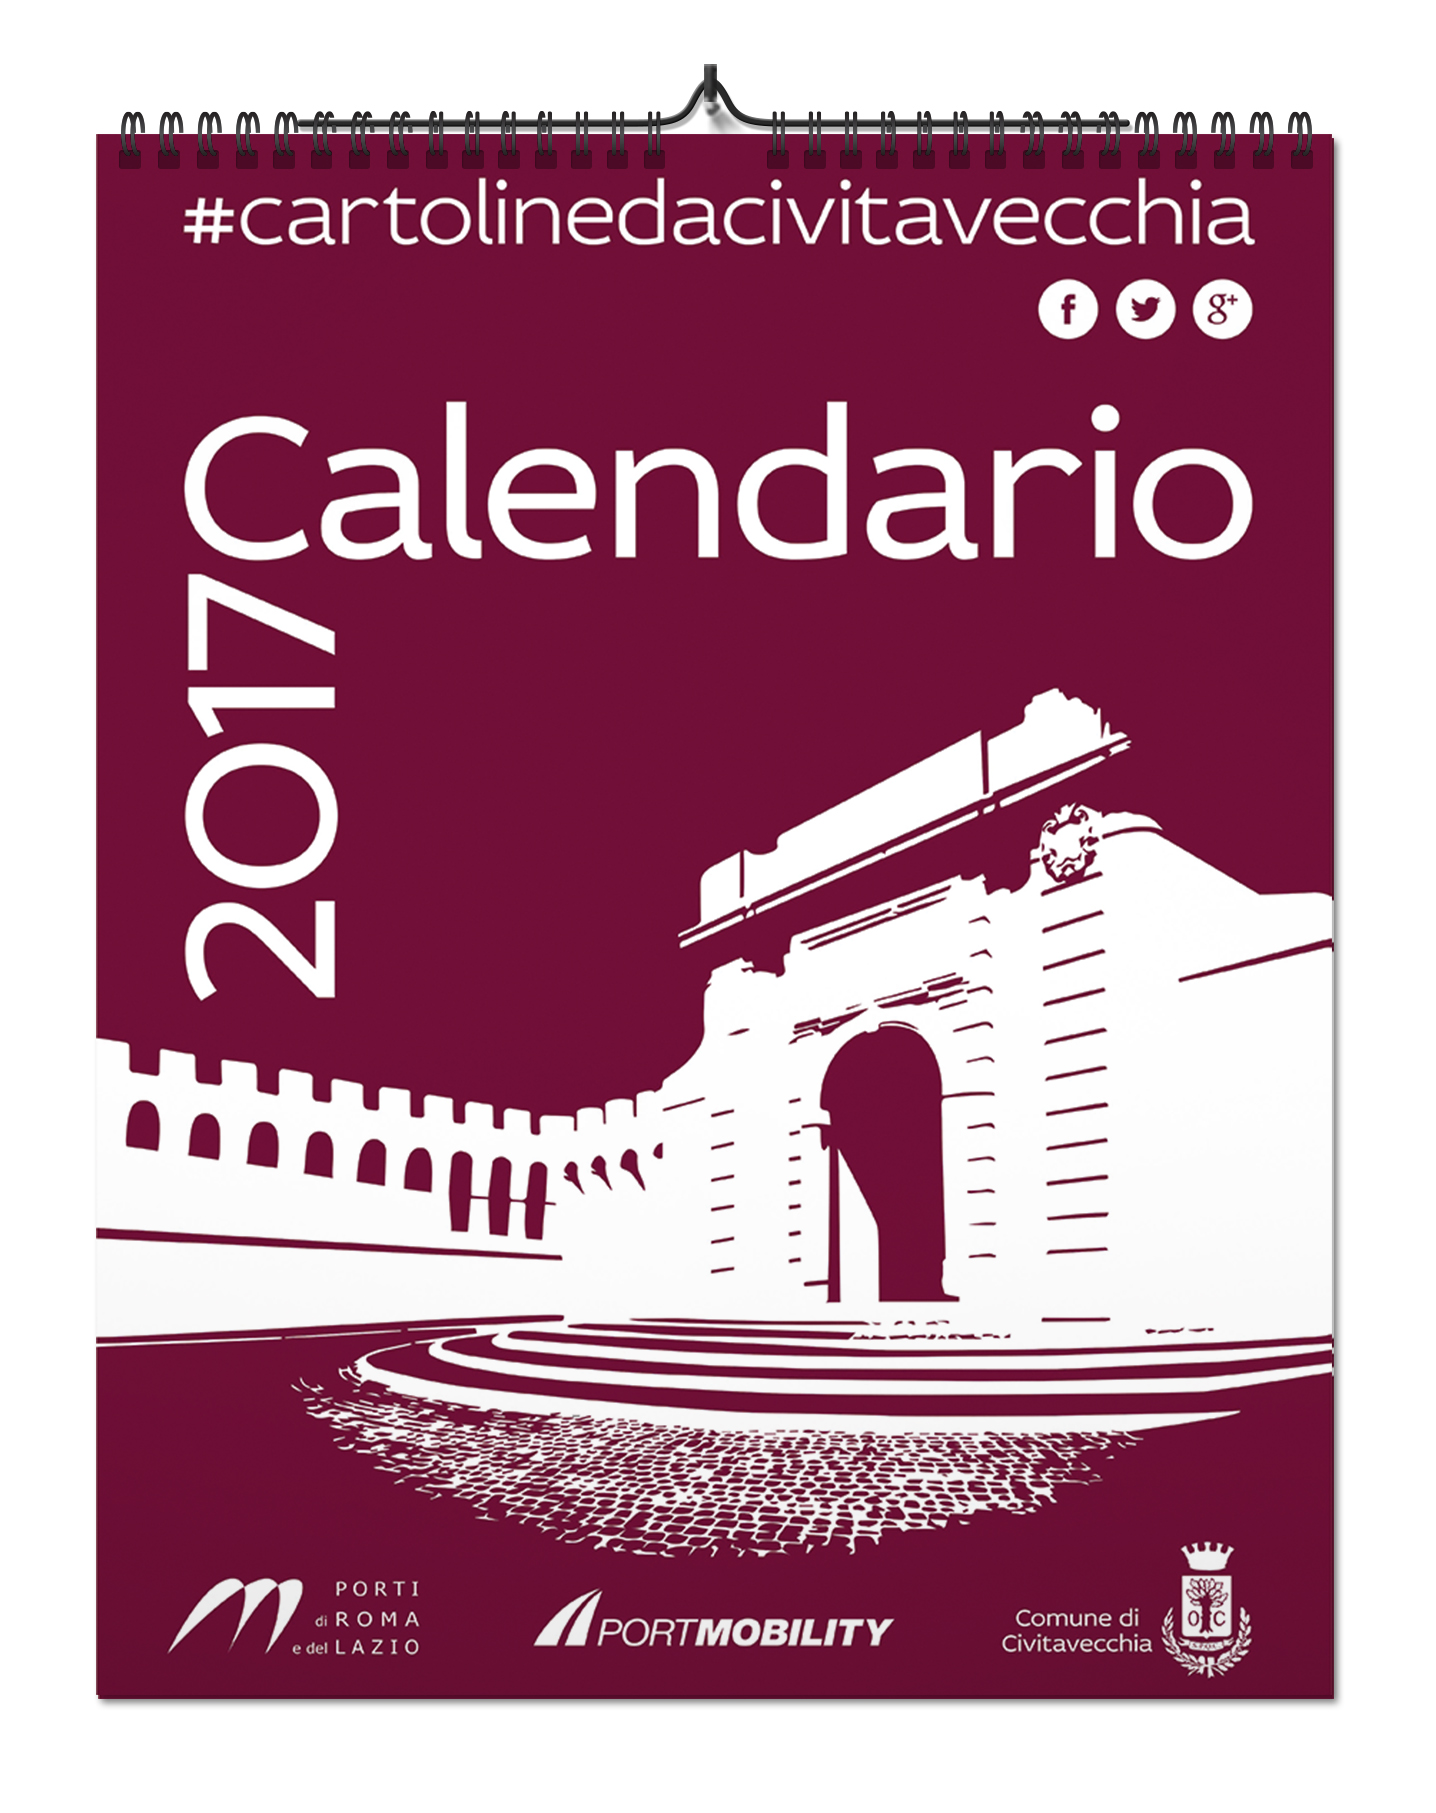 Cover of the Calendar 2017 of Postcards from Civitavecchia